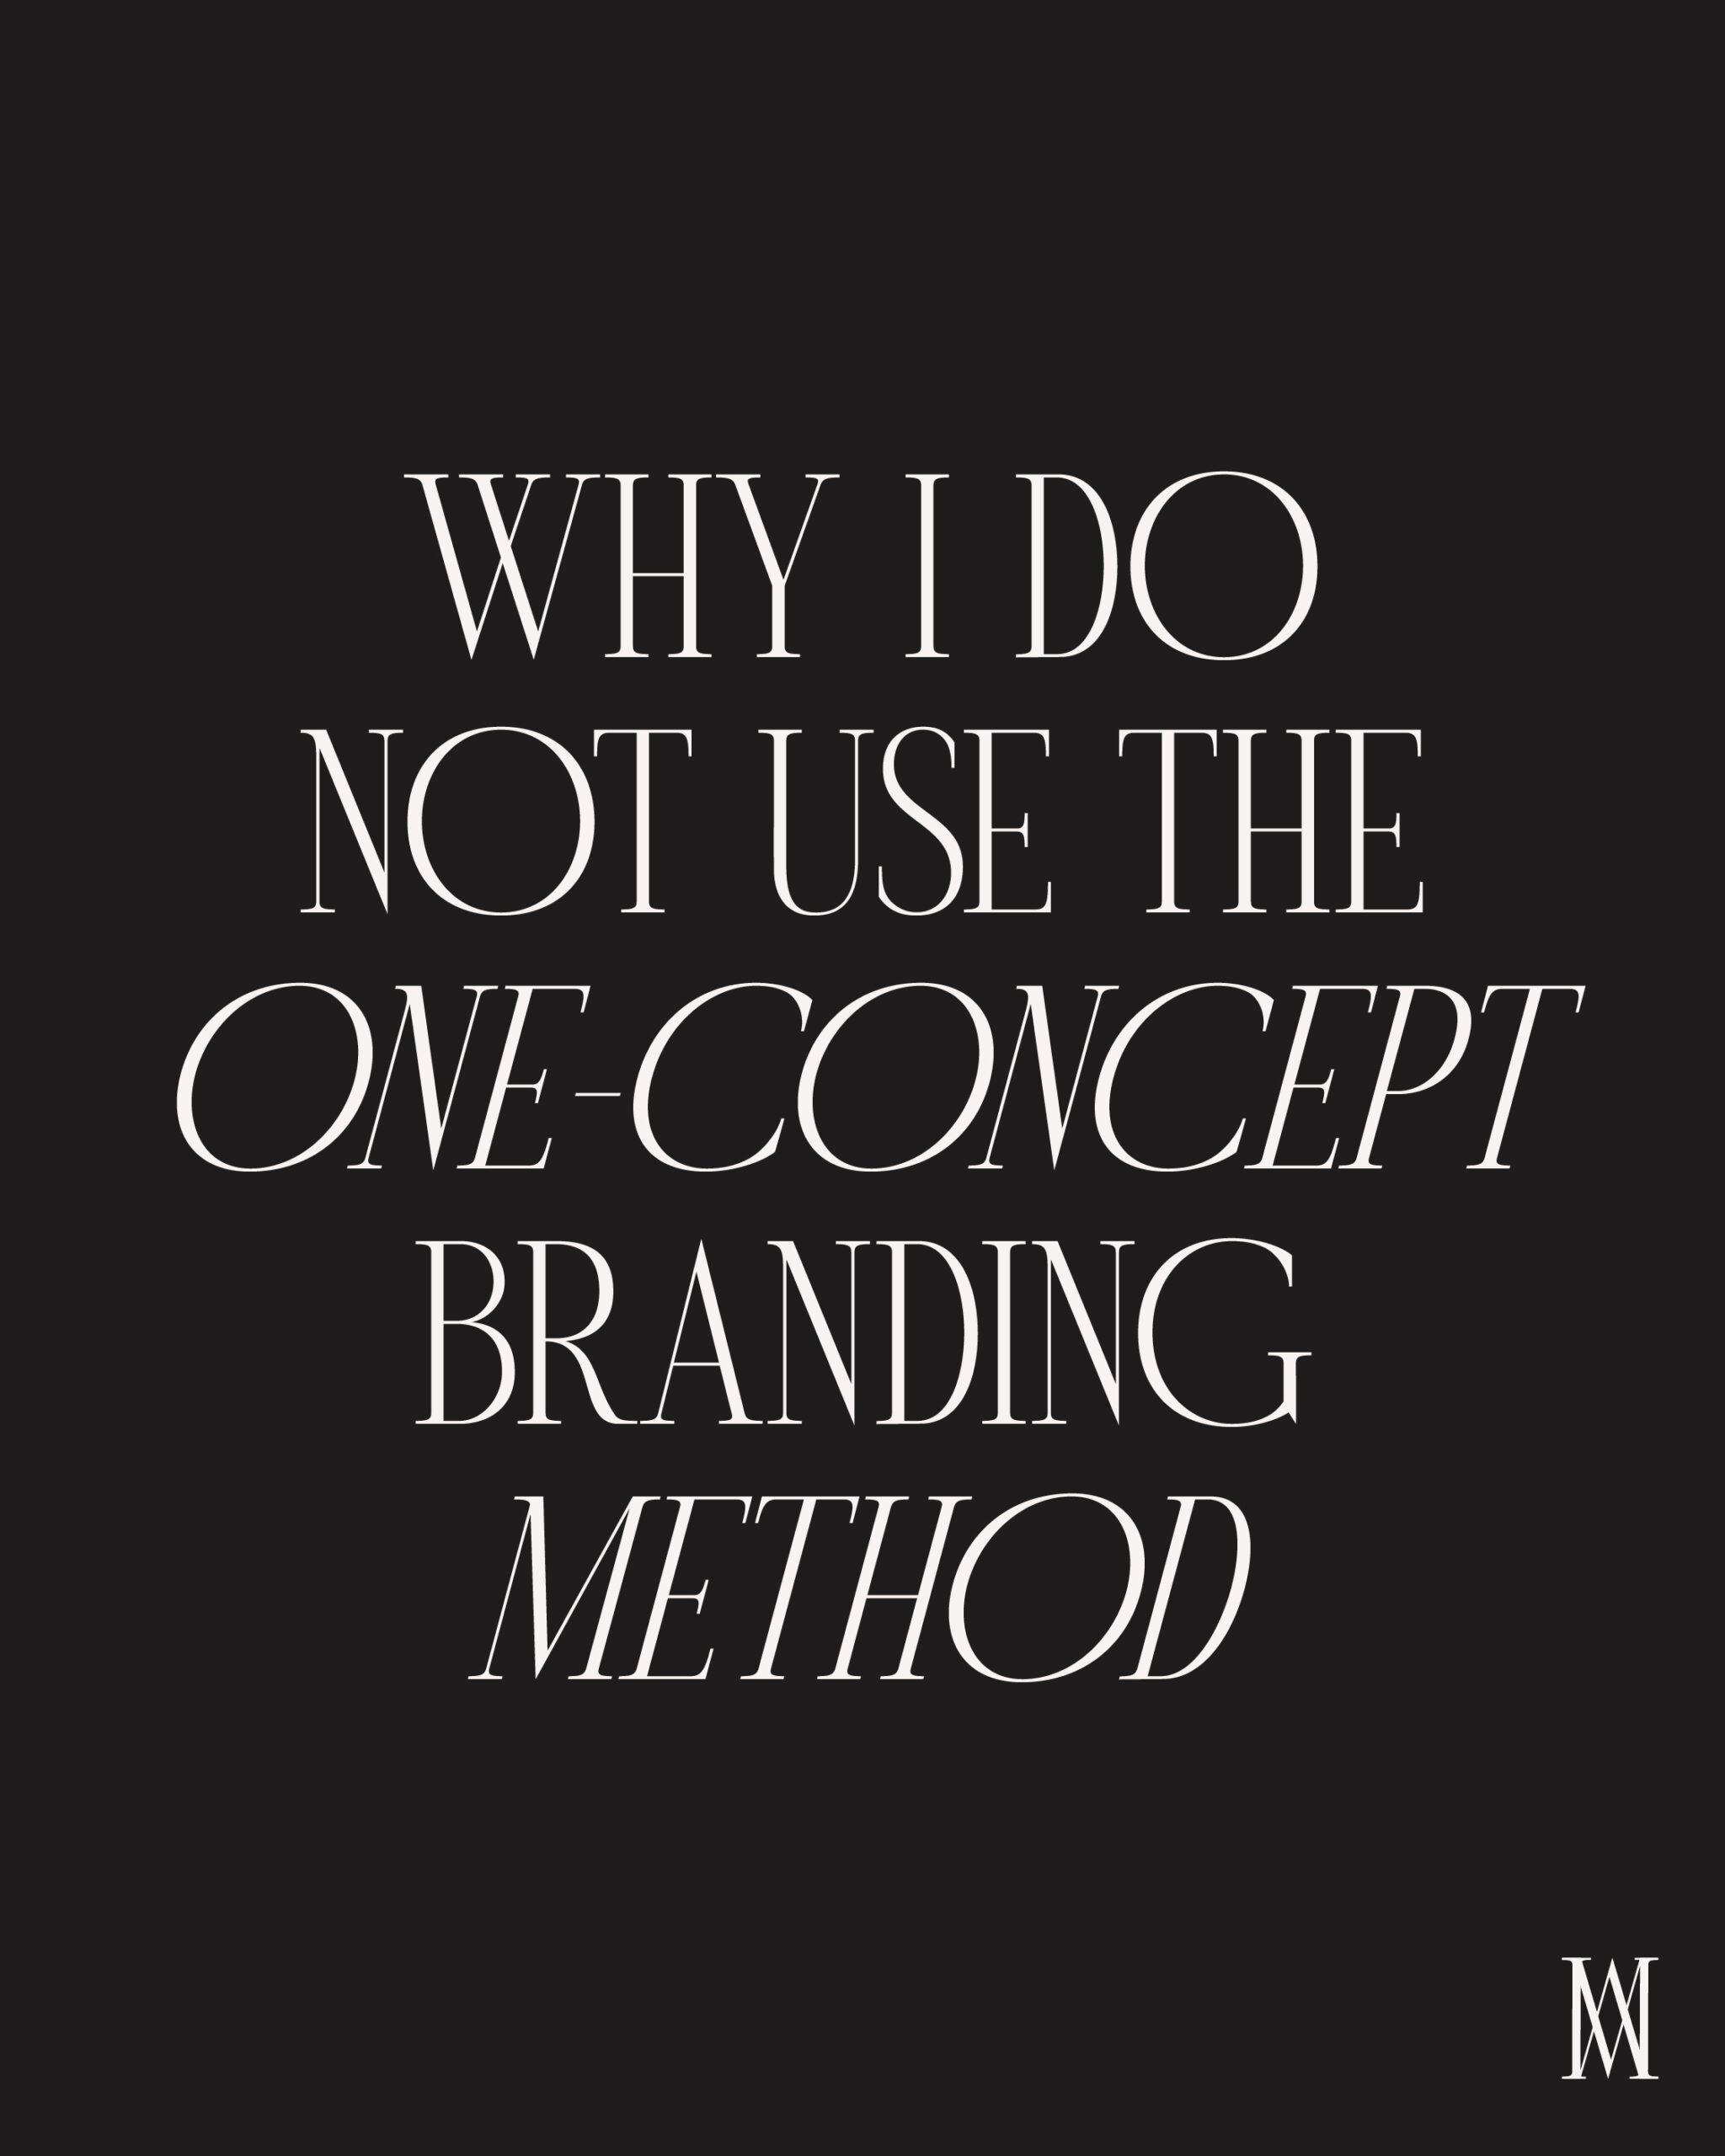 WHY I DO NOT FOLLOW THE ONE CONCEPT BRANDING METHOD